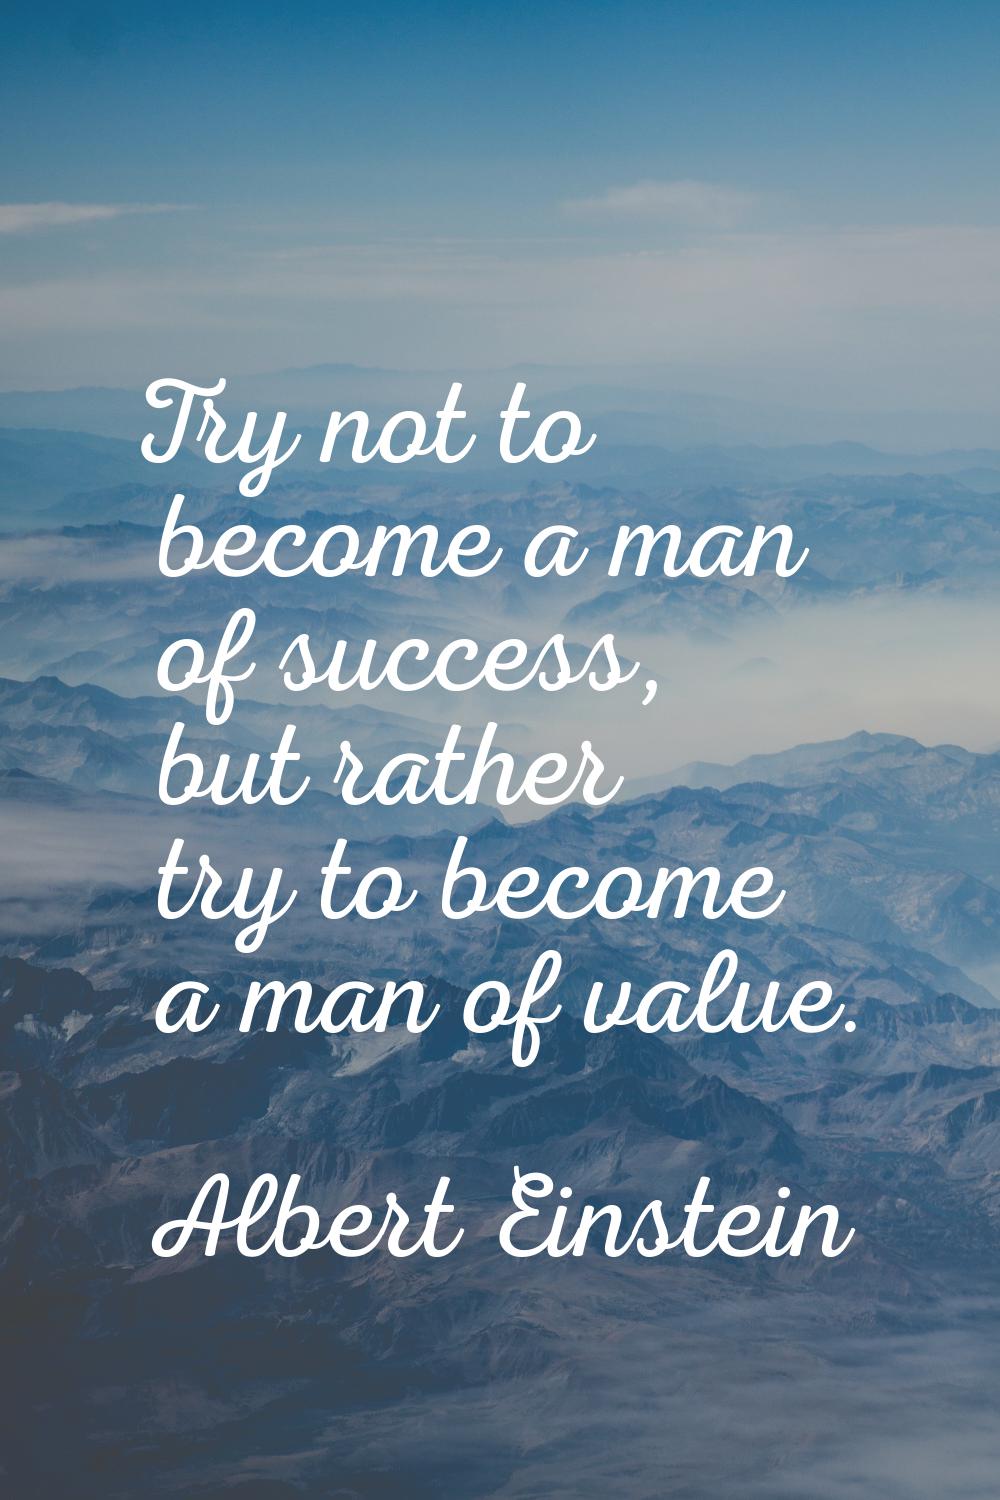 Try not to become a man of success, but rather try to become a man of value.